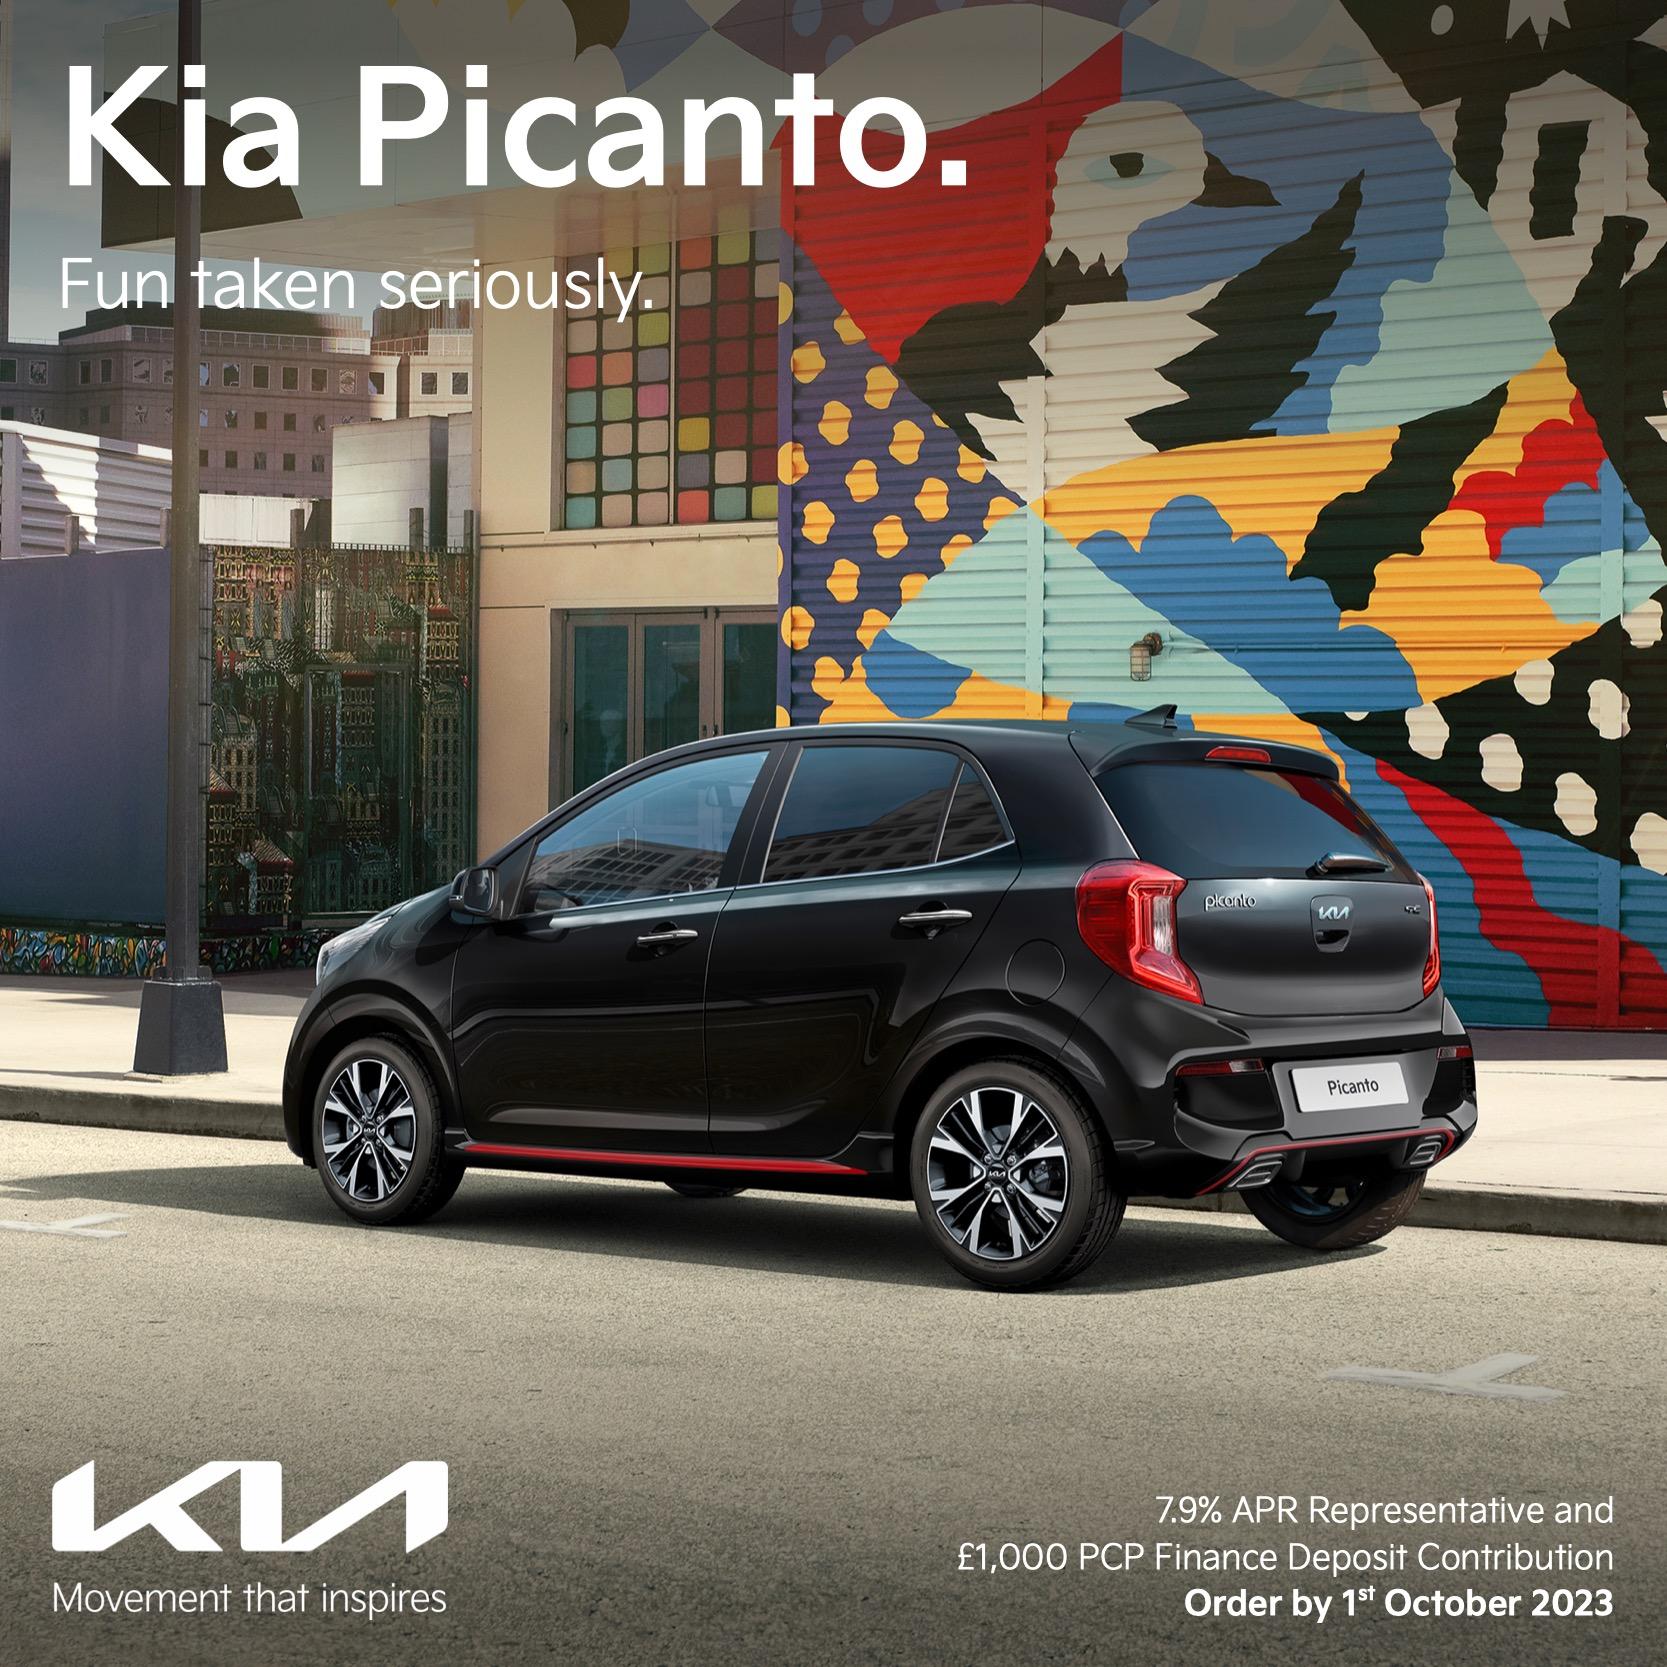 Kia Picanto with offer